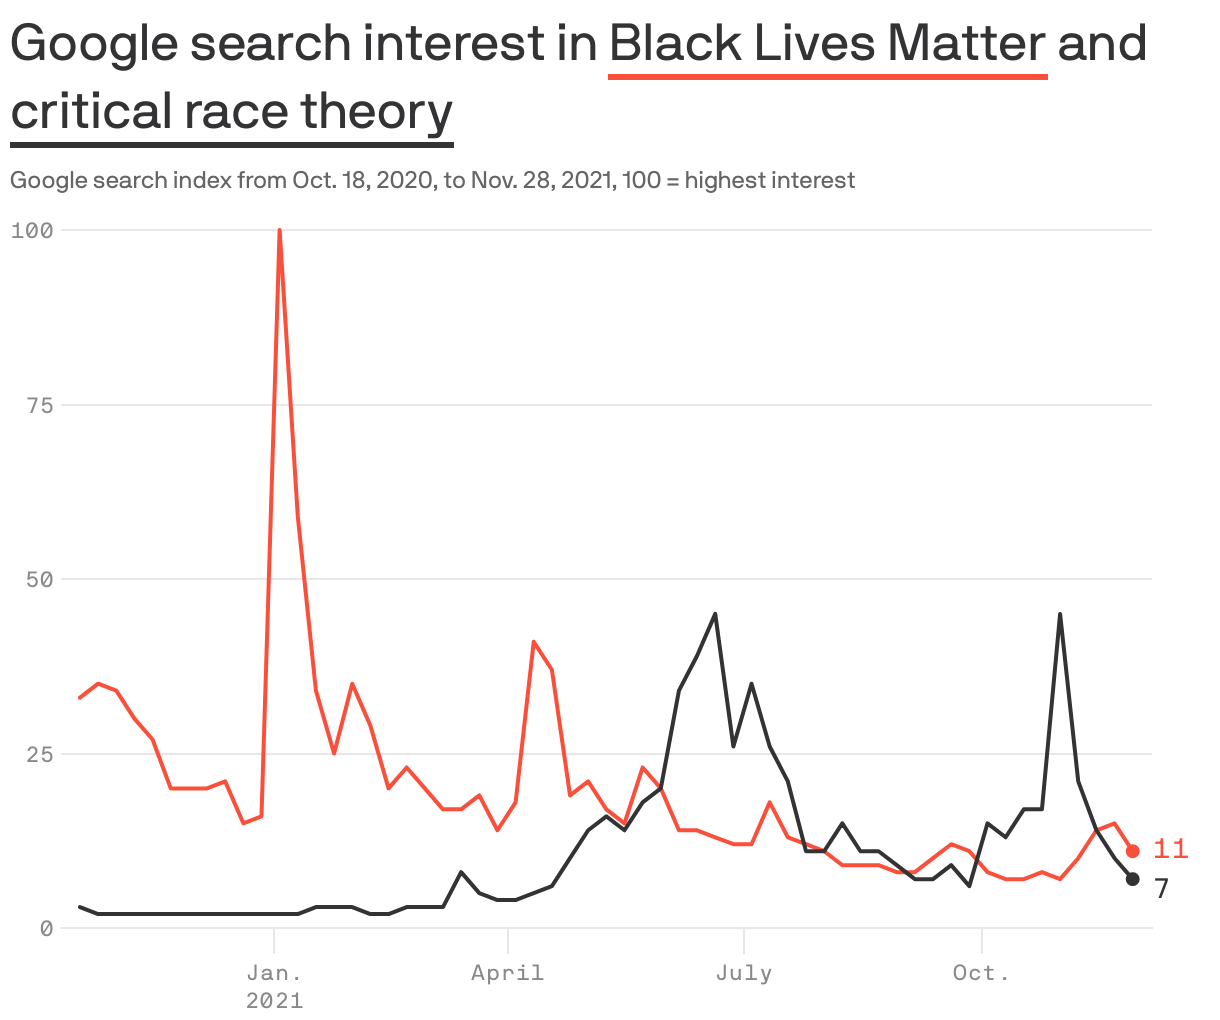 Google search interest in <span style="border-bottom: 3px solid #FA4F3B; padding-bottom: 2px;">Black Lives Matter</span> and <span style="border-bottom: 3px solid #333333; padding-bottom: 2px;">critical race theory</span>